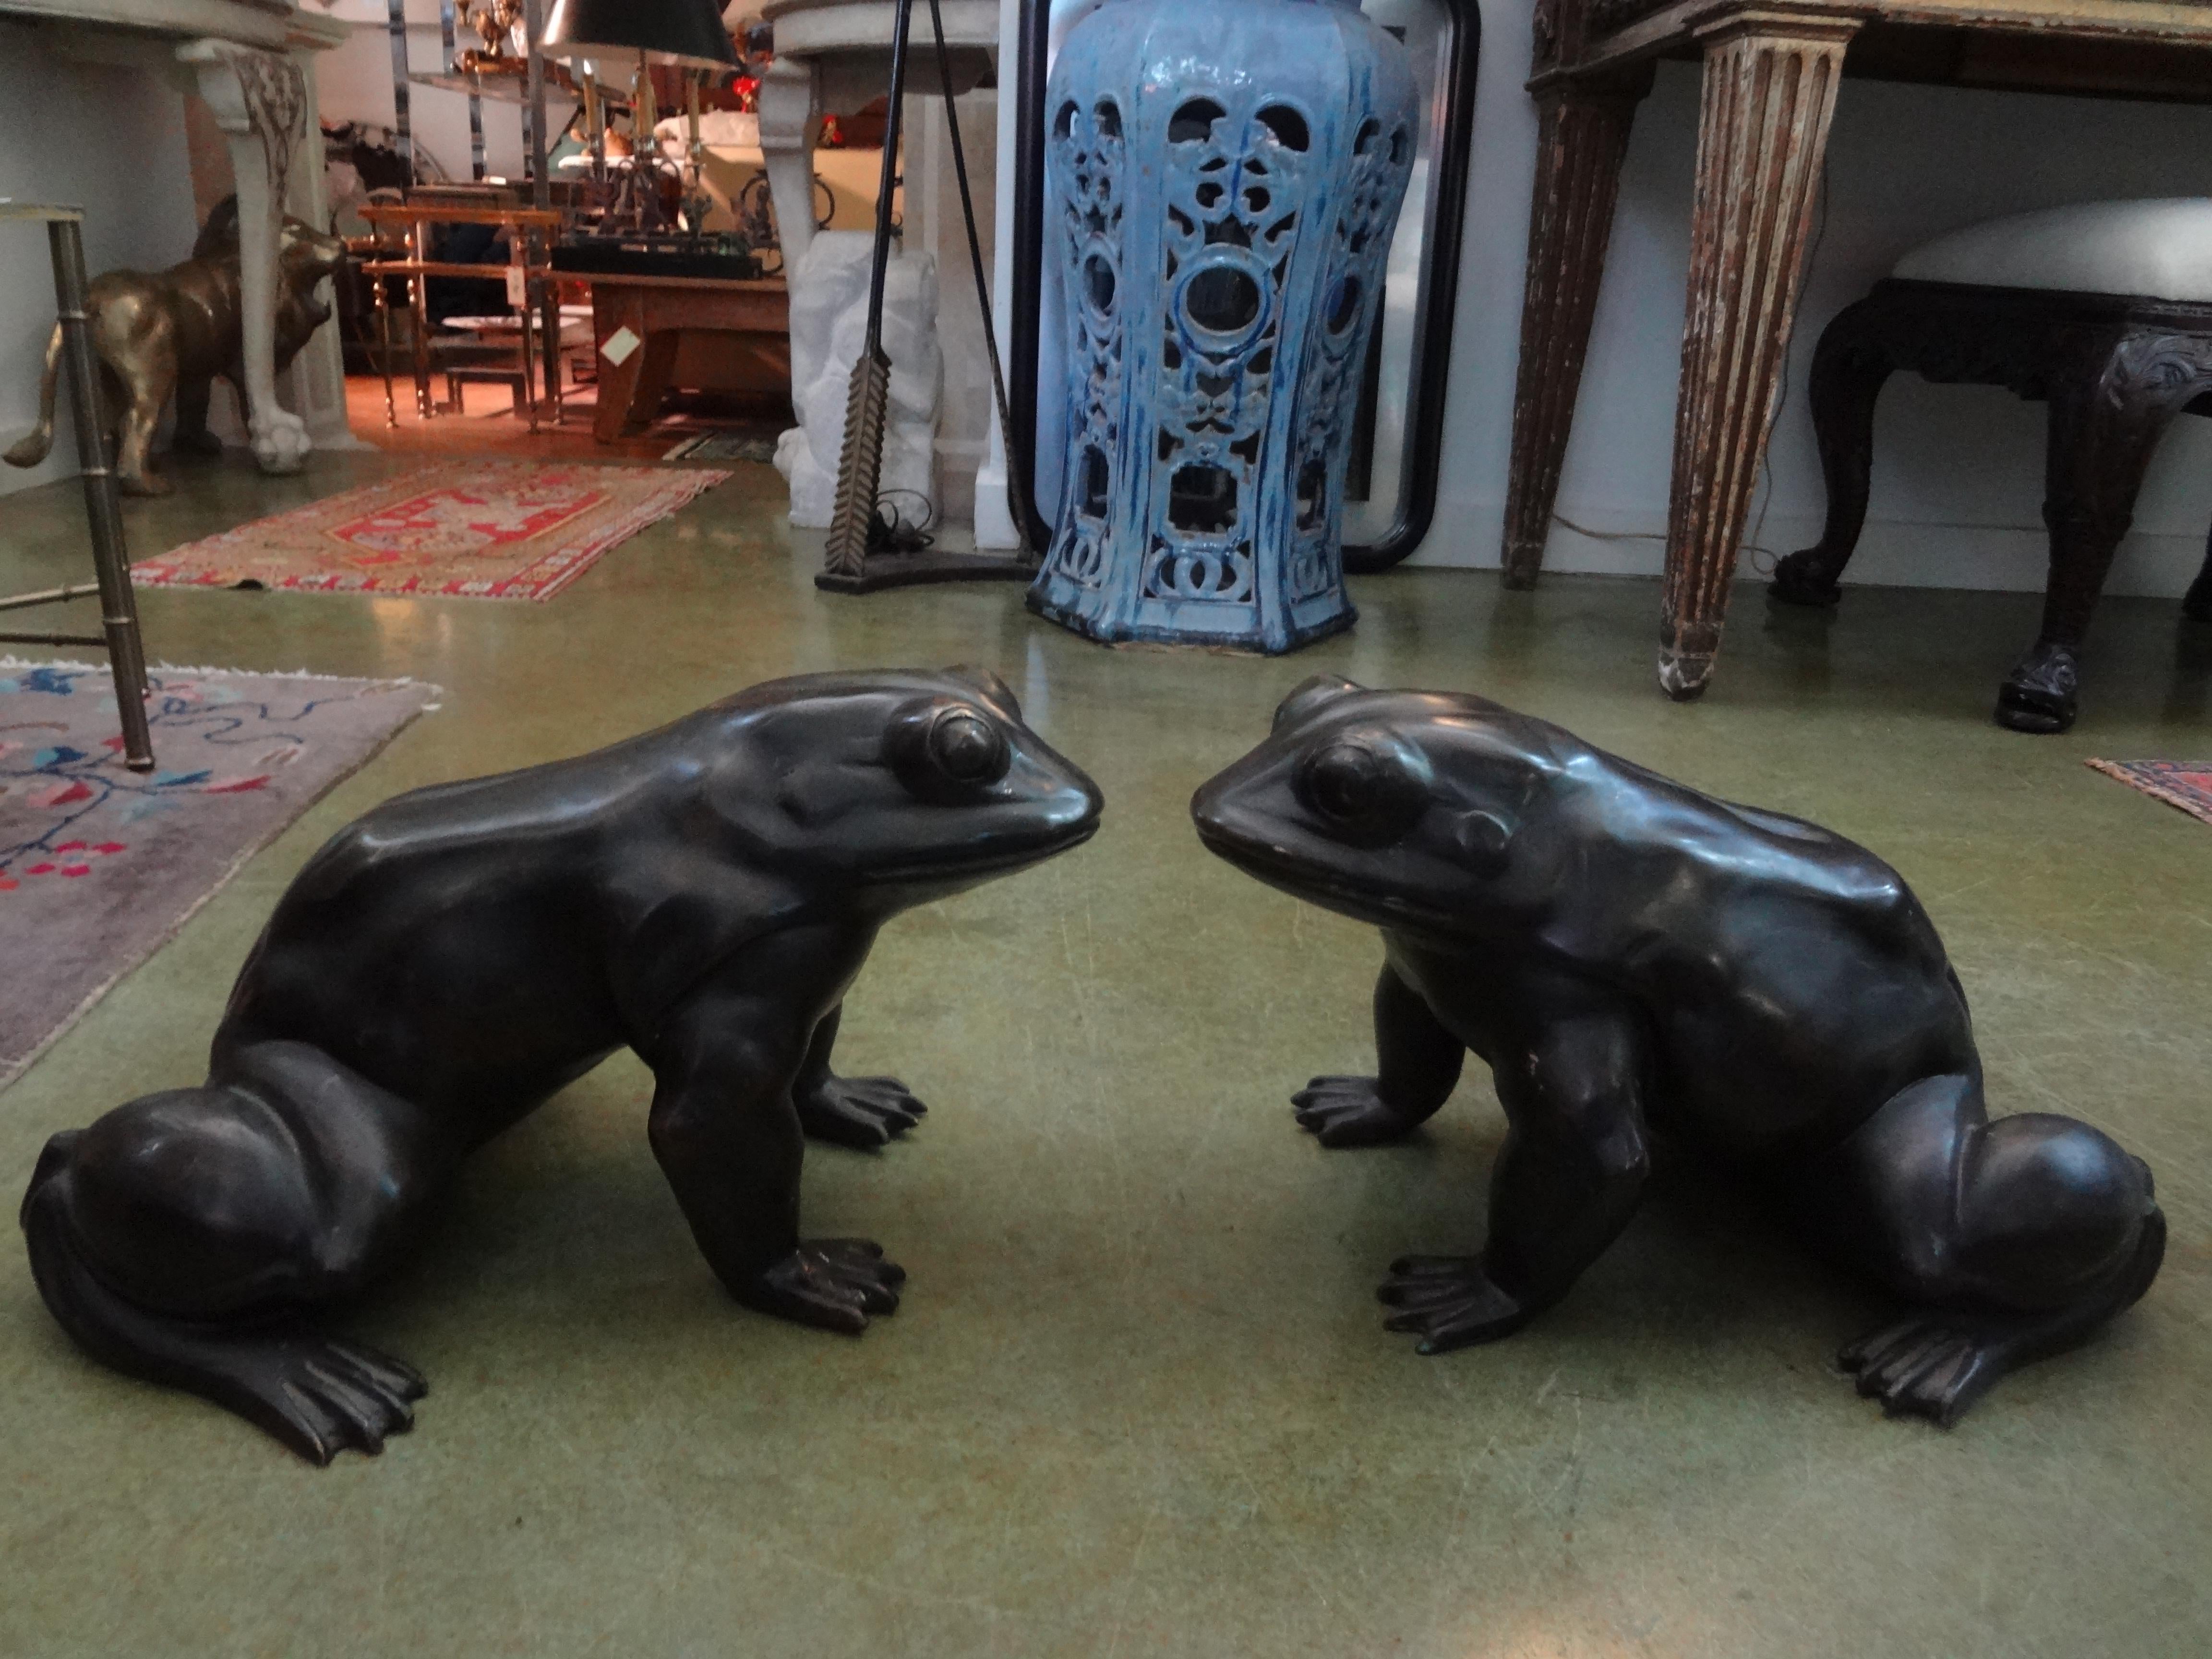 Pair Of Japanese Bronze Frog Sculptures.
Our large Japanese bronze frog statues or sculptures will make a lovely addition to your garden room or atrium or entrance hall.
Frogs, are considered to bring good luck and prosperity. They are often